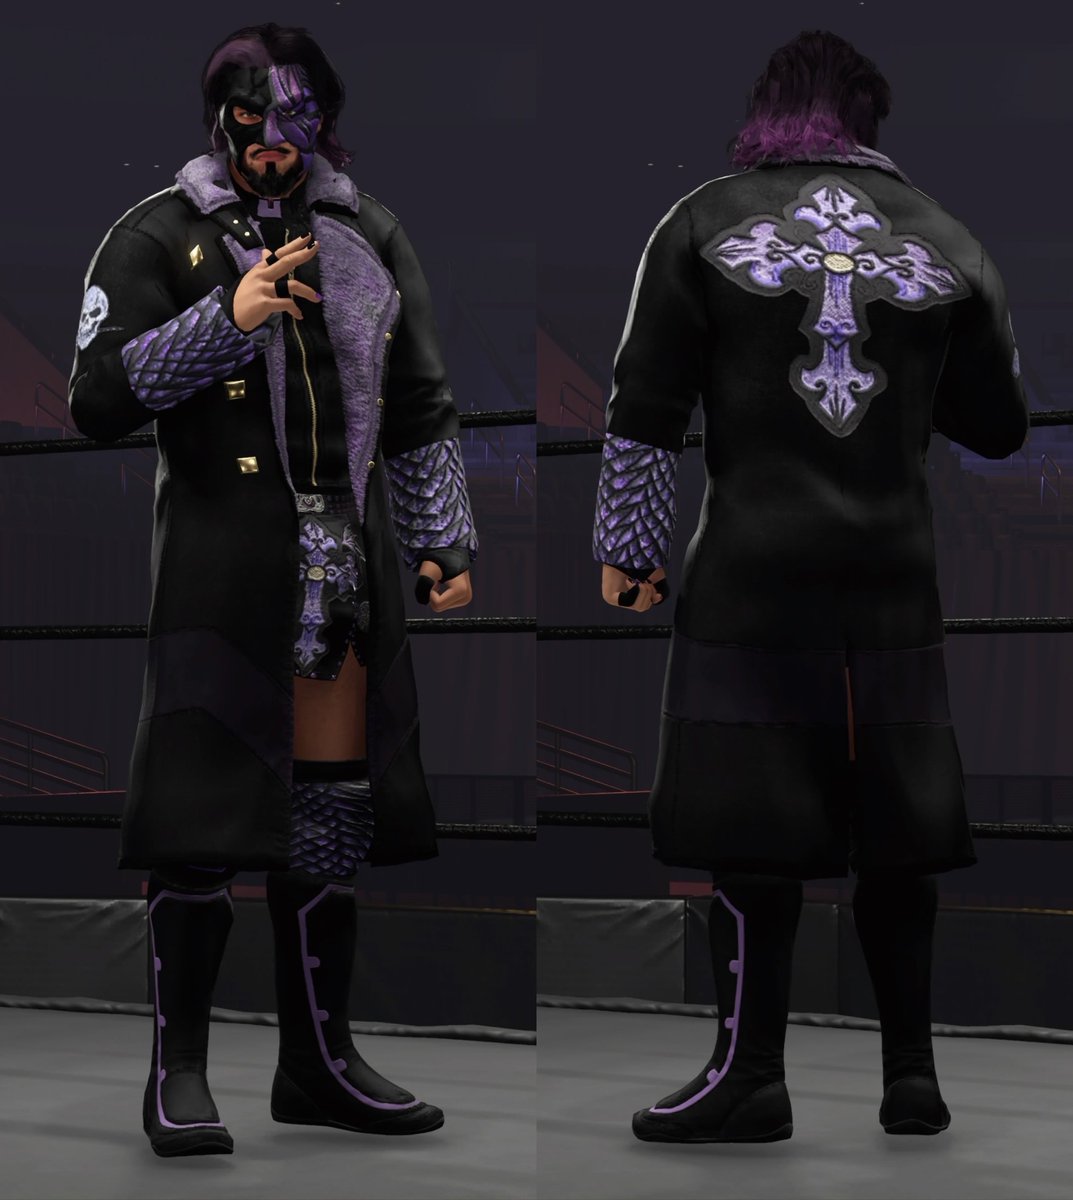 ⚫️🟣 A2J *UPDATED* 🟣⚫️ 

Updated face texture, morph and skin tone. 

Gear changes to colouring/brightness and accessories. Updated mask for entrance attire. 

Now Up on CC!

Tags: A2J / AWF

#AWF #CAWs #Cawcommunity #wwe2k23 #WWE #Caw #originalcaw #A2J